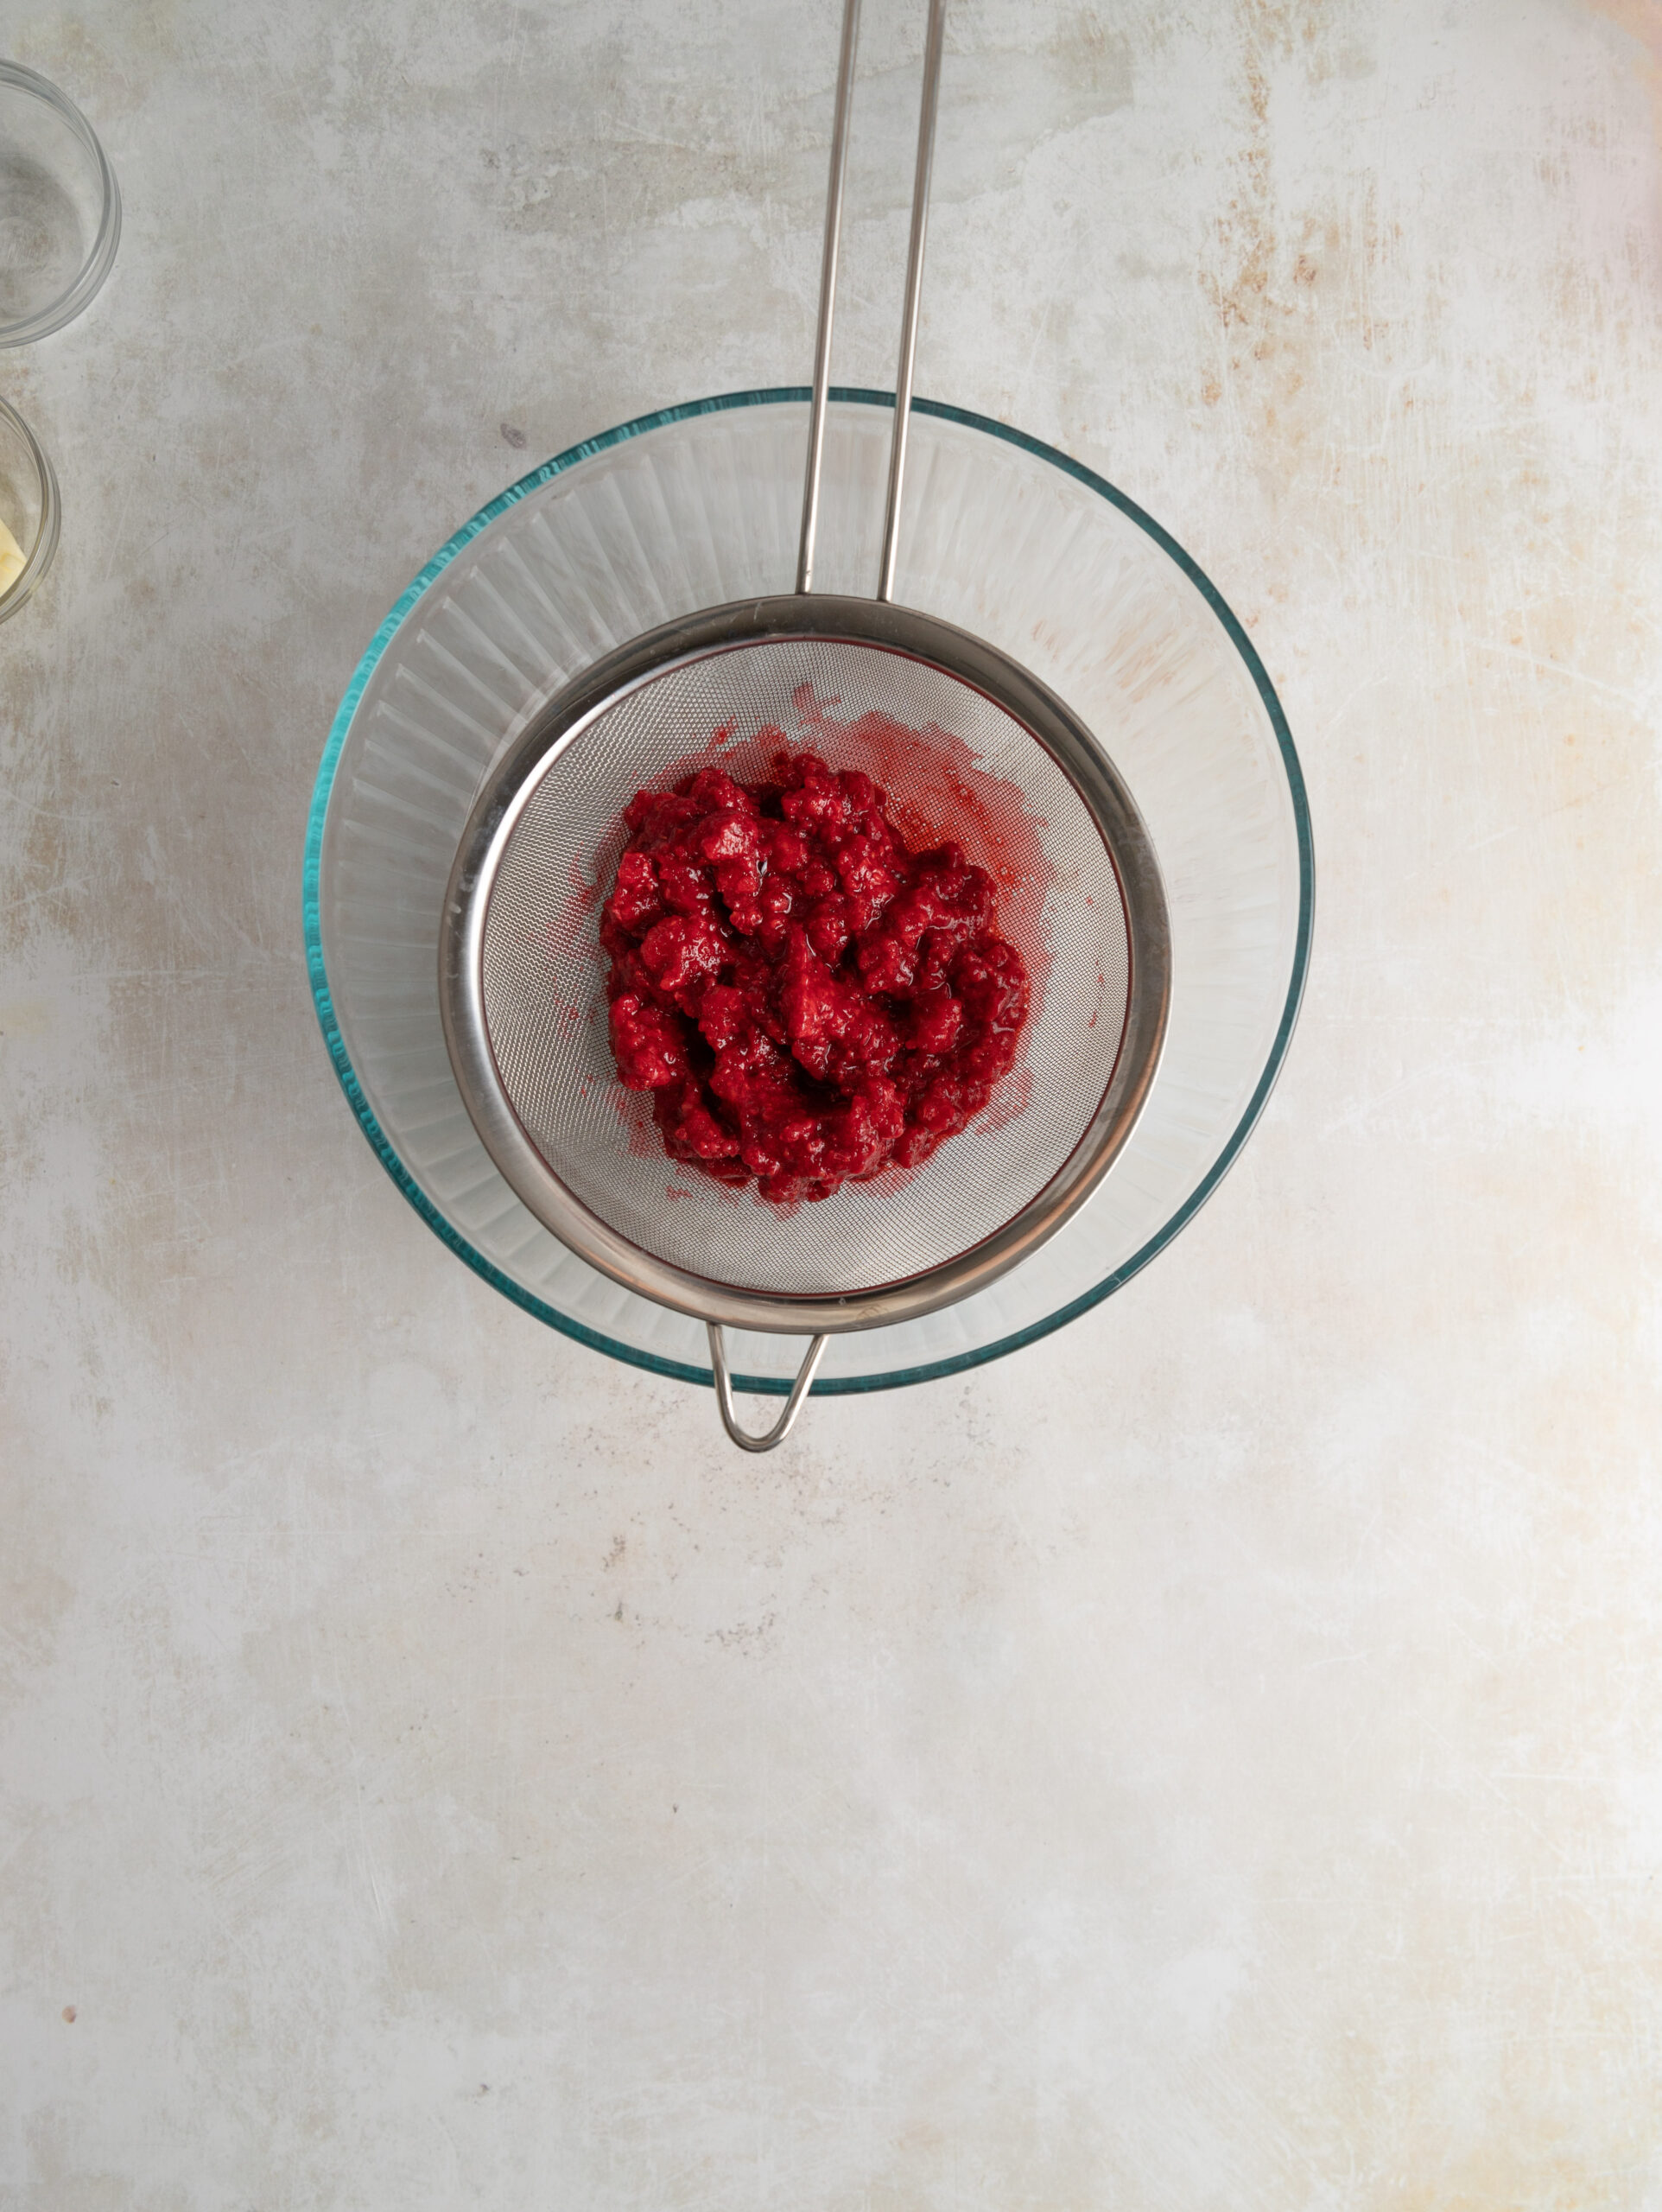 Frozen raspberries in a sieve draining over a bowl.